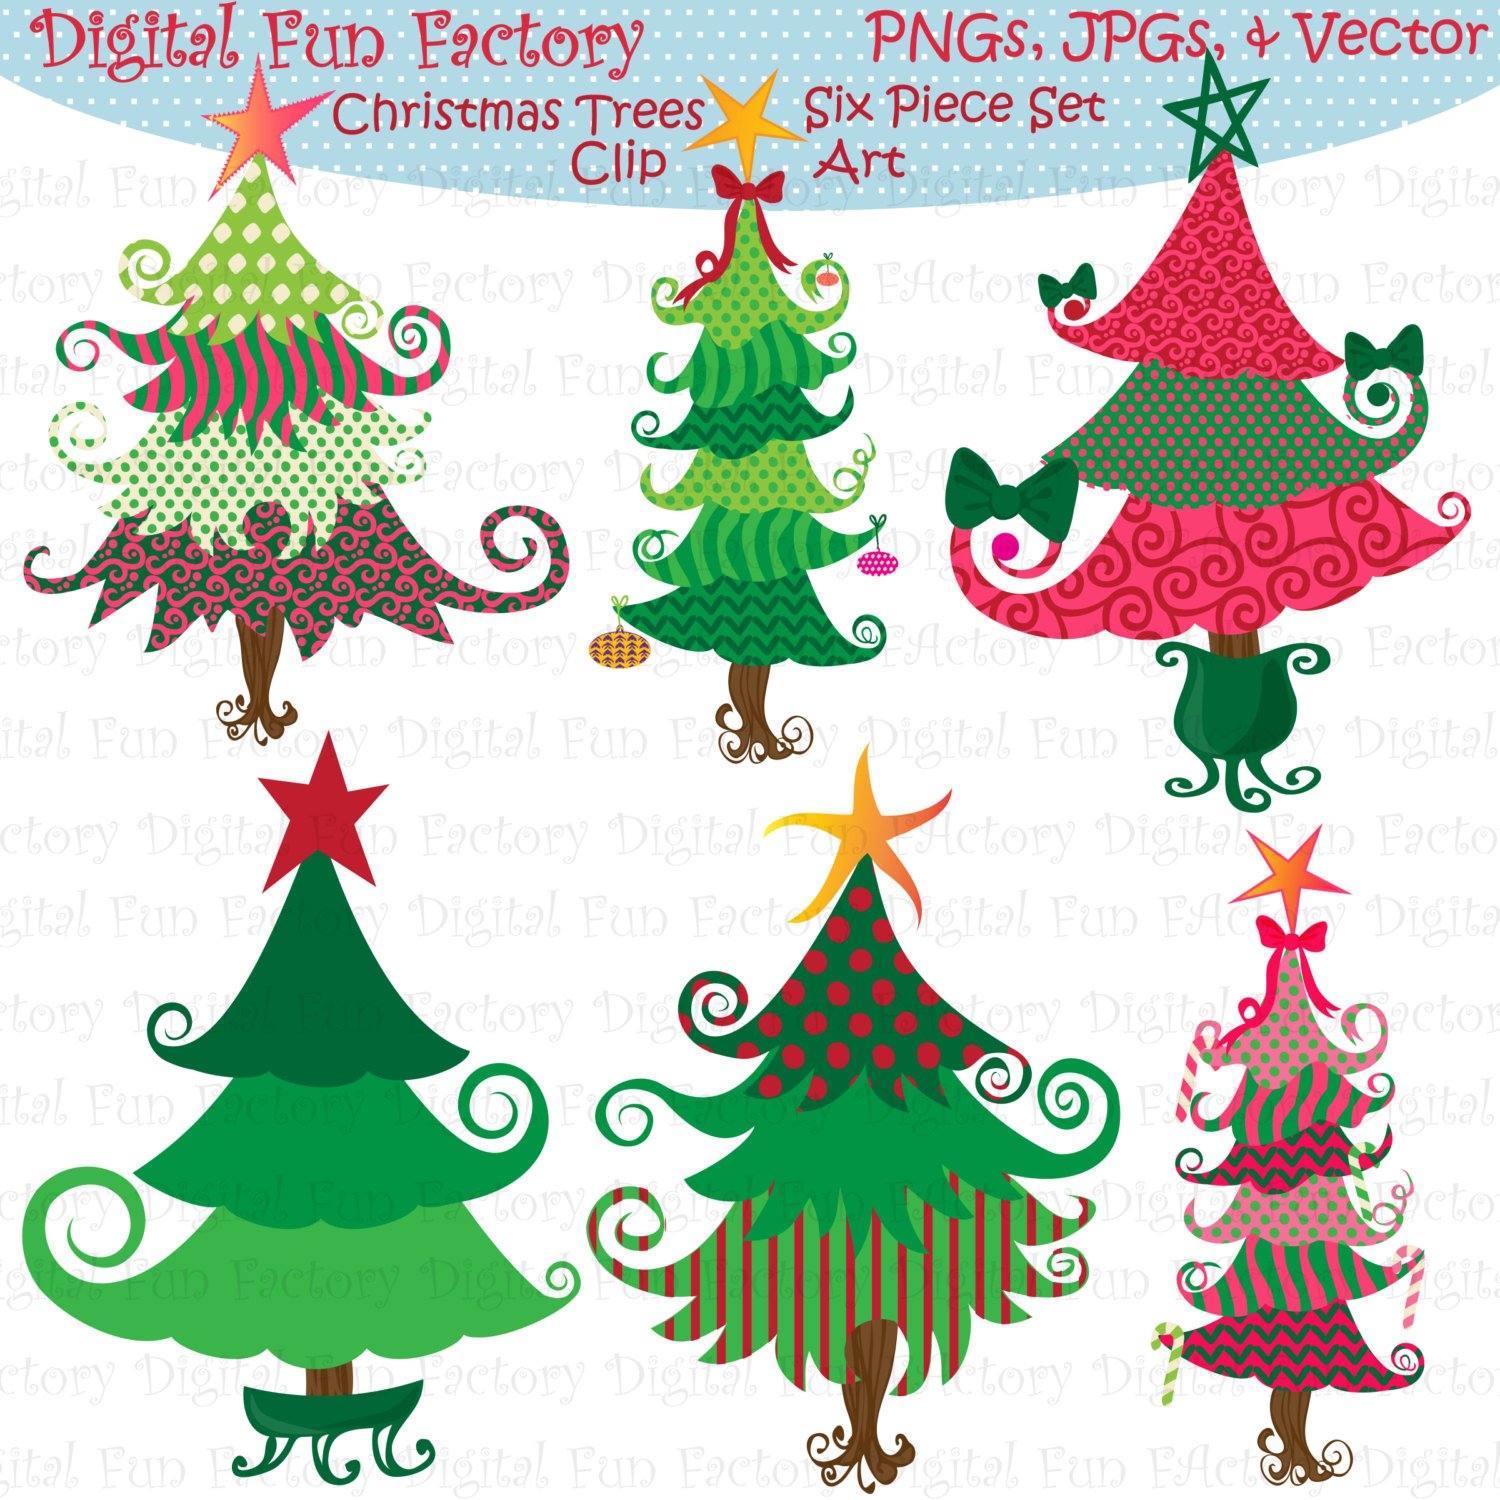 1600 The Grinch free clipart.